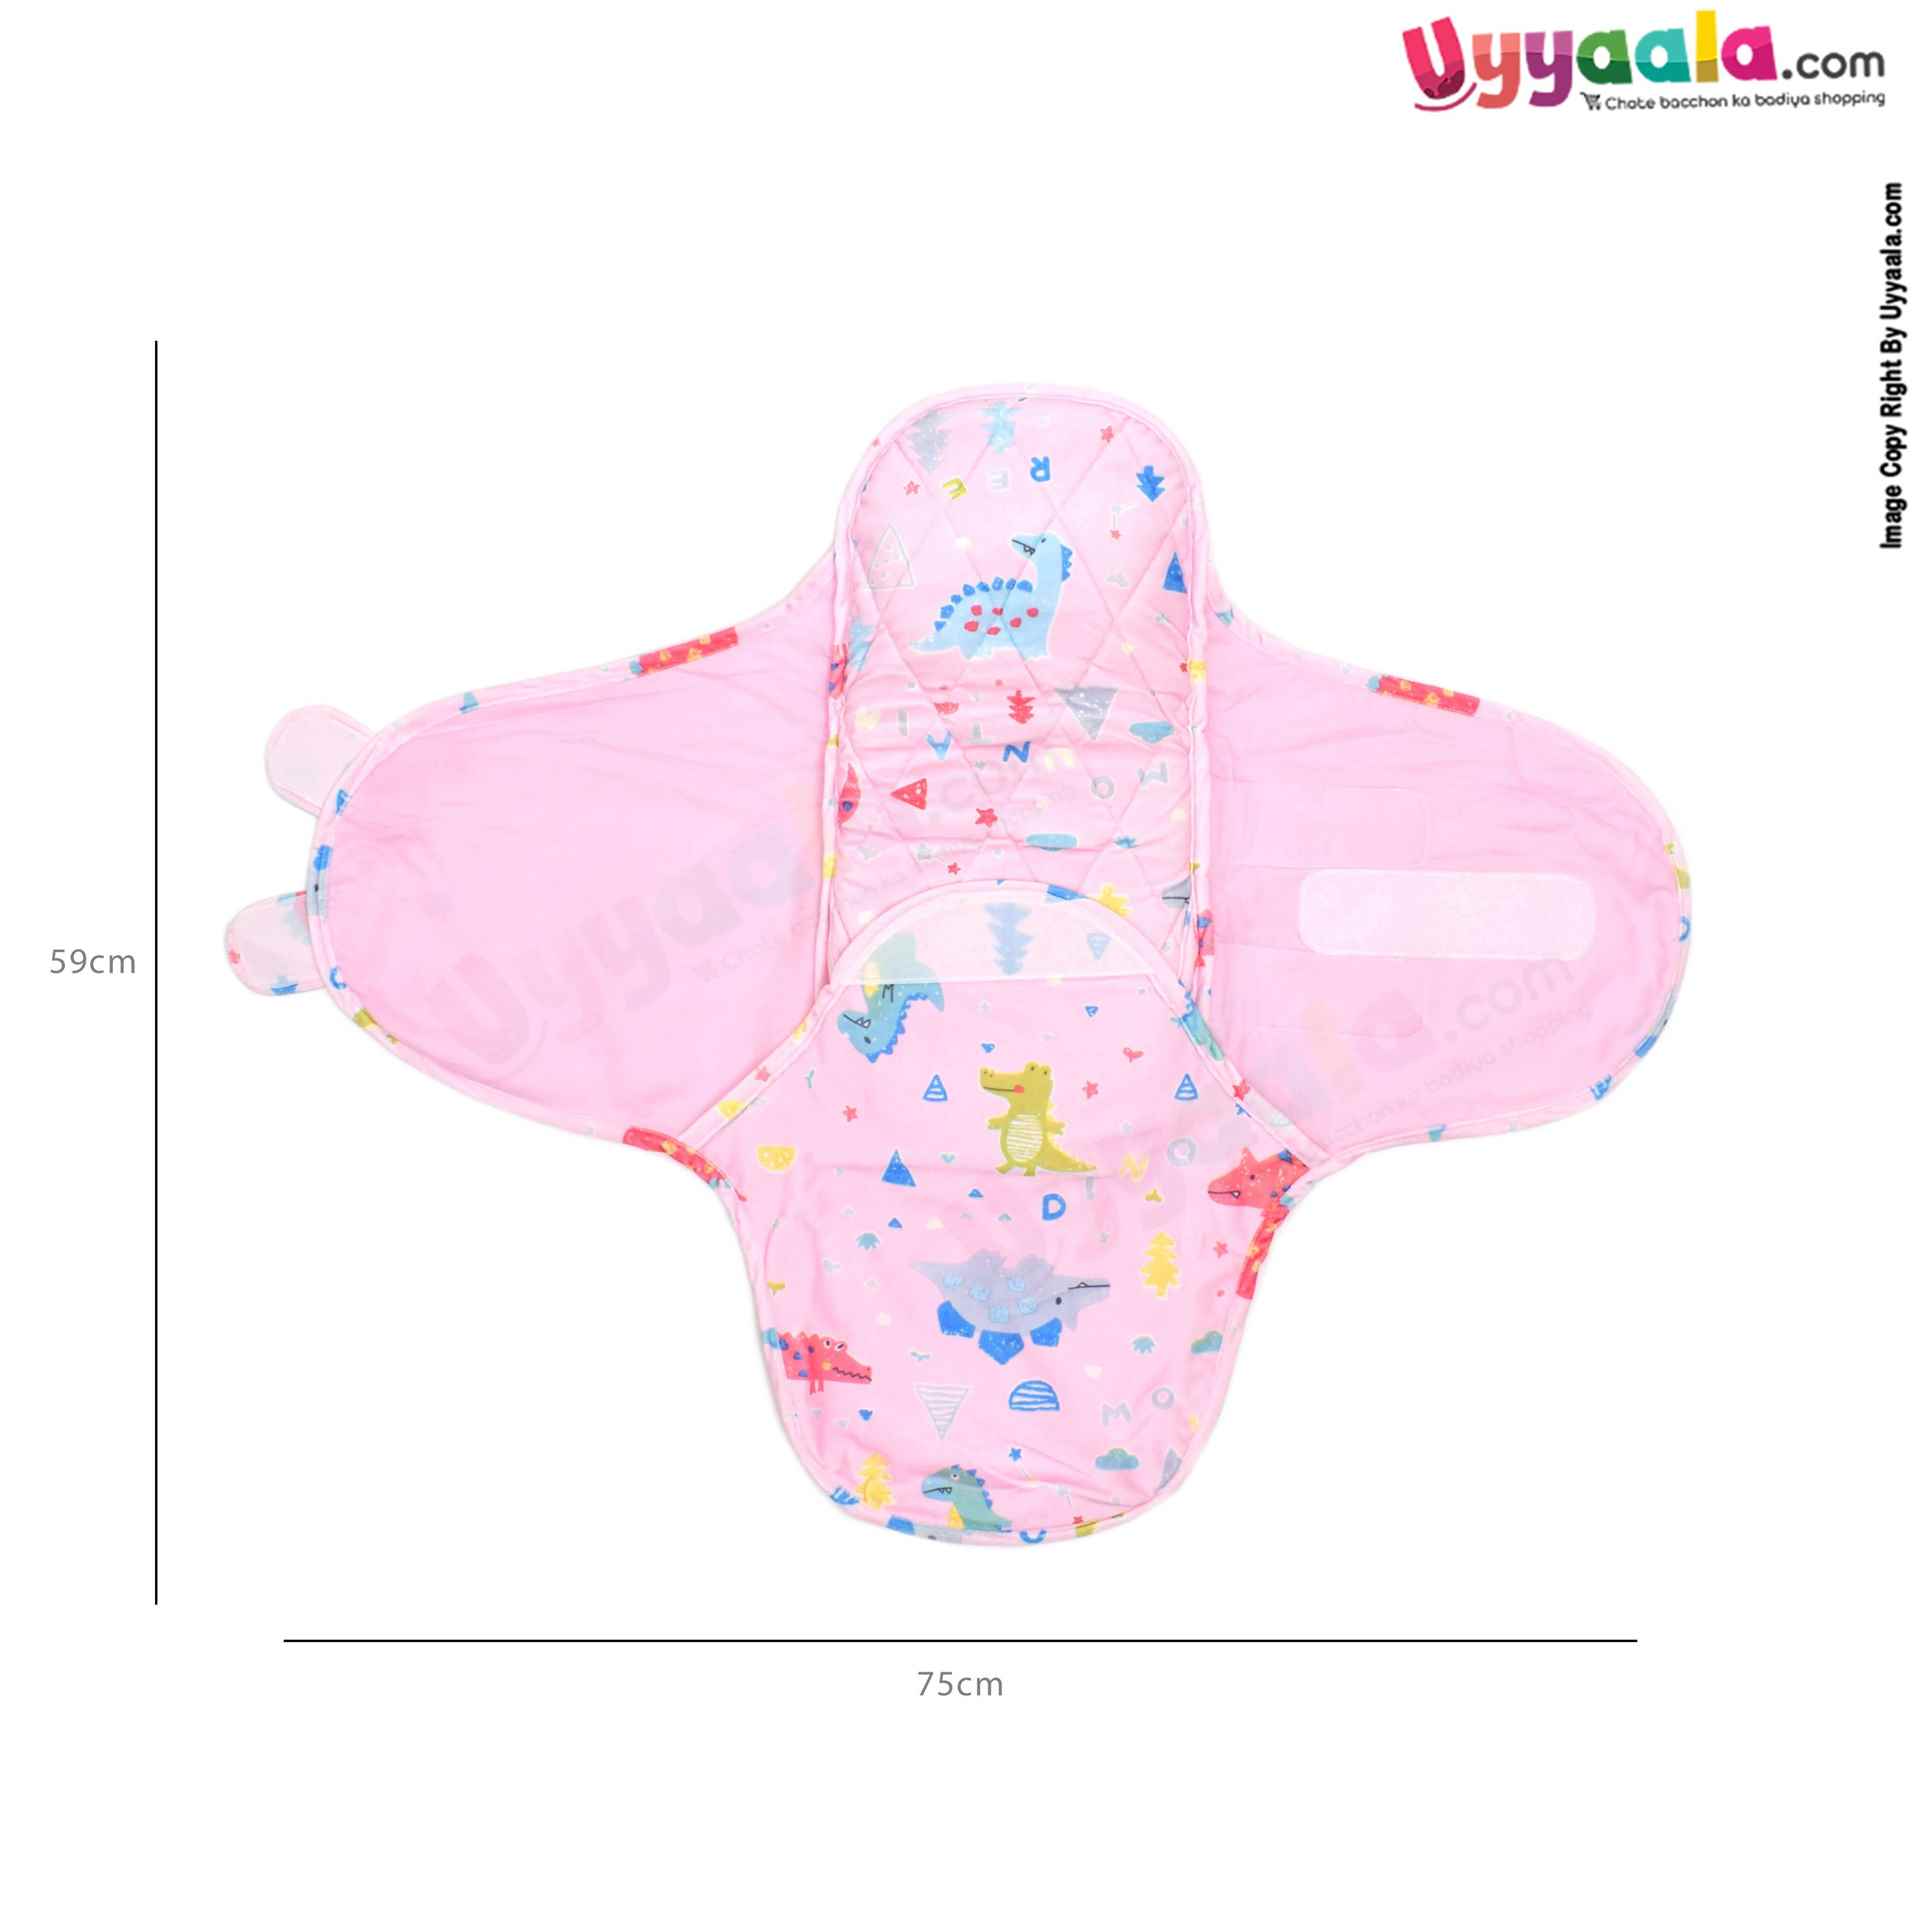 Muslin Cotton Baby Swaddle Wrapper with Neck Support and Animal Prints, 0-17m, Size(88*69cm) - Light Pink